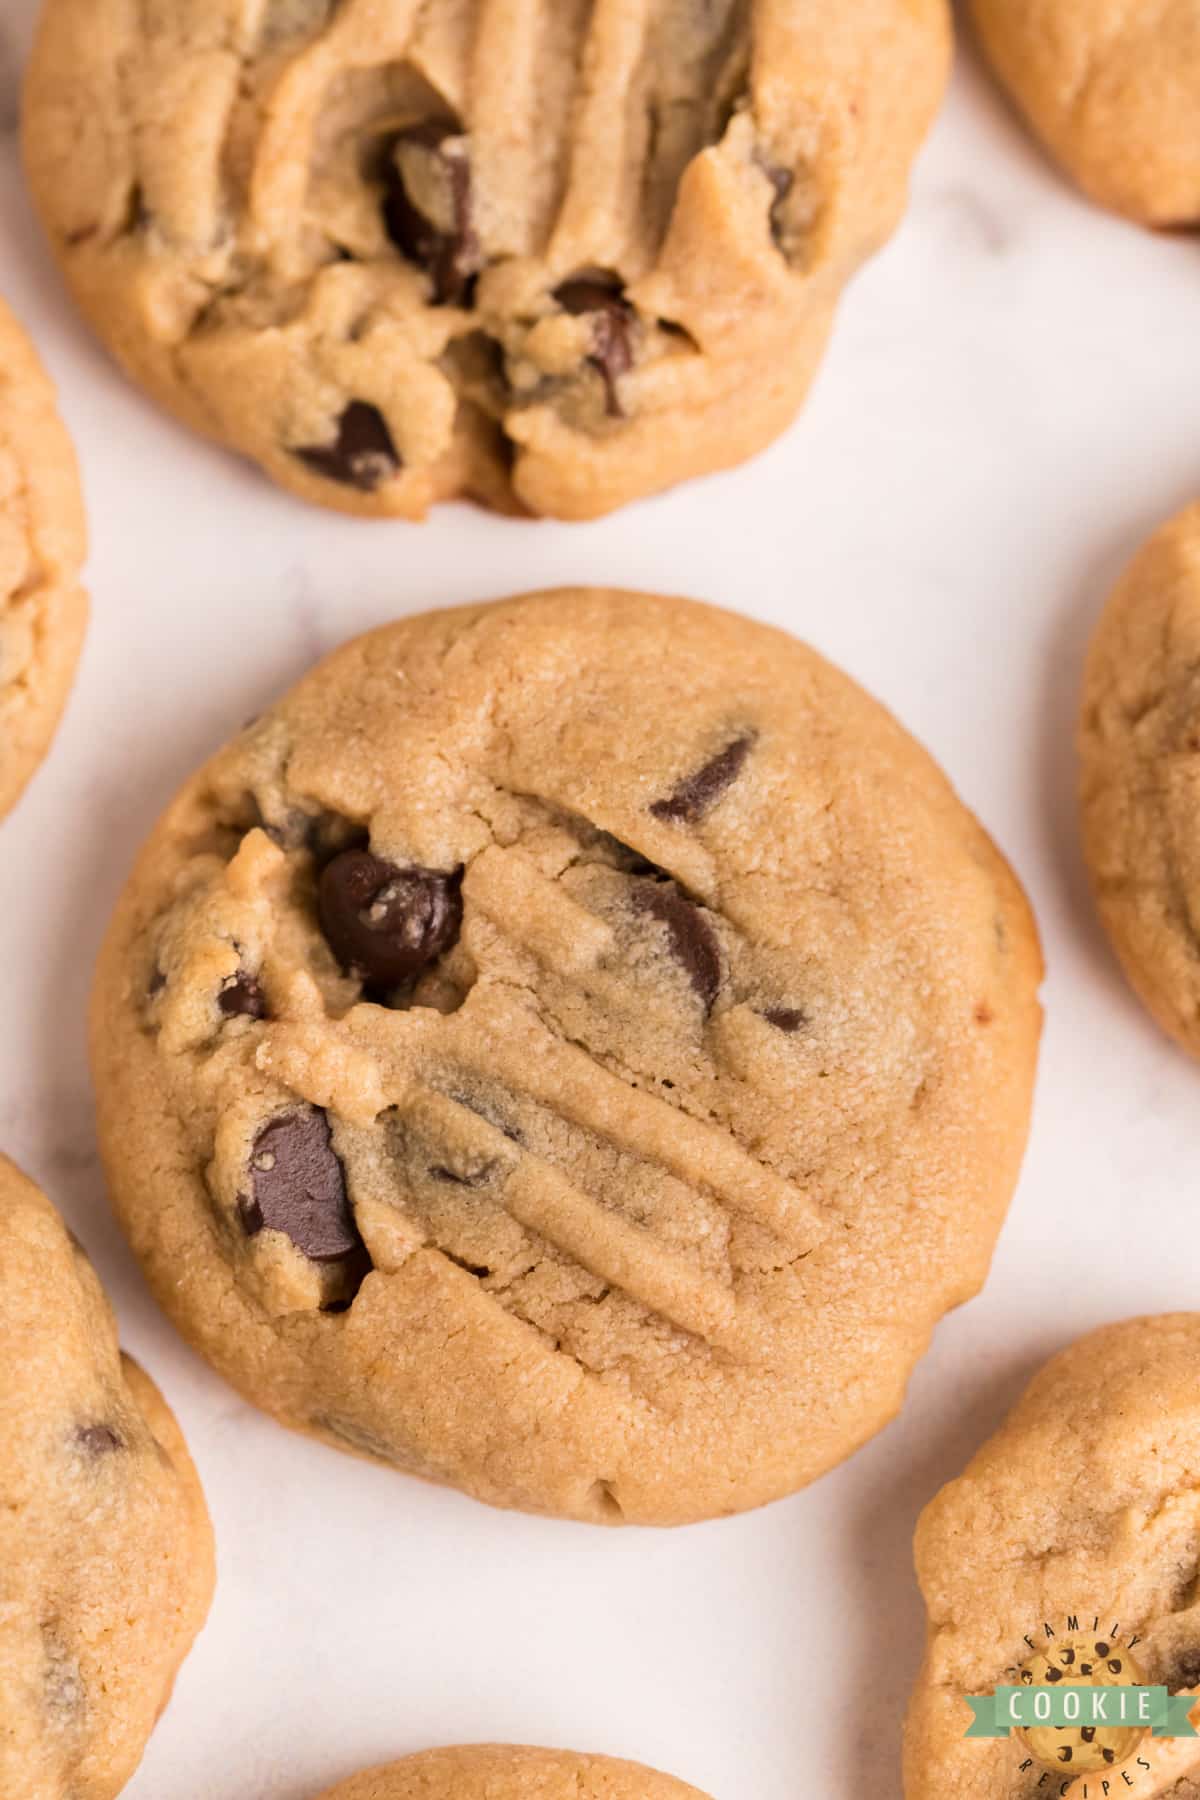 Peanut butter cookie with chocolate chips